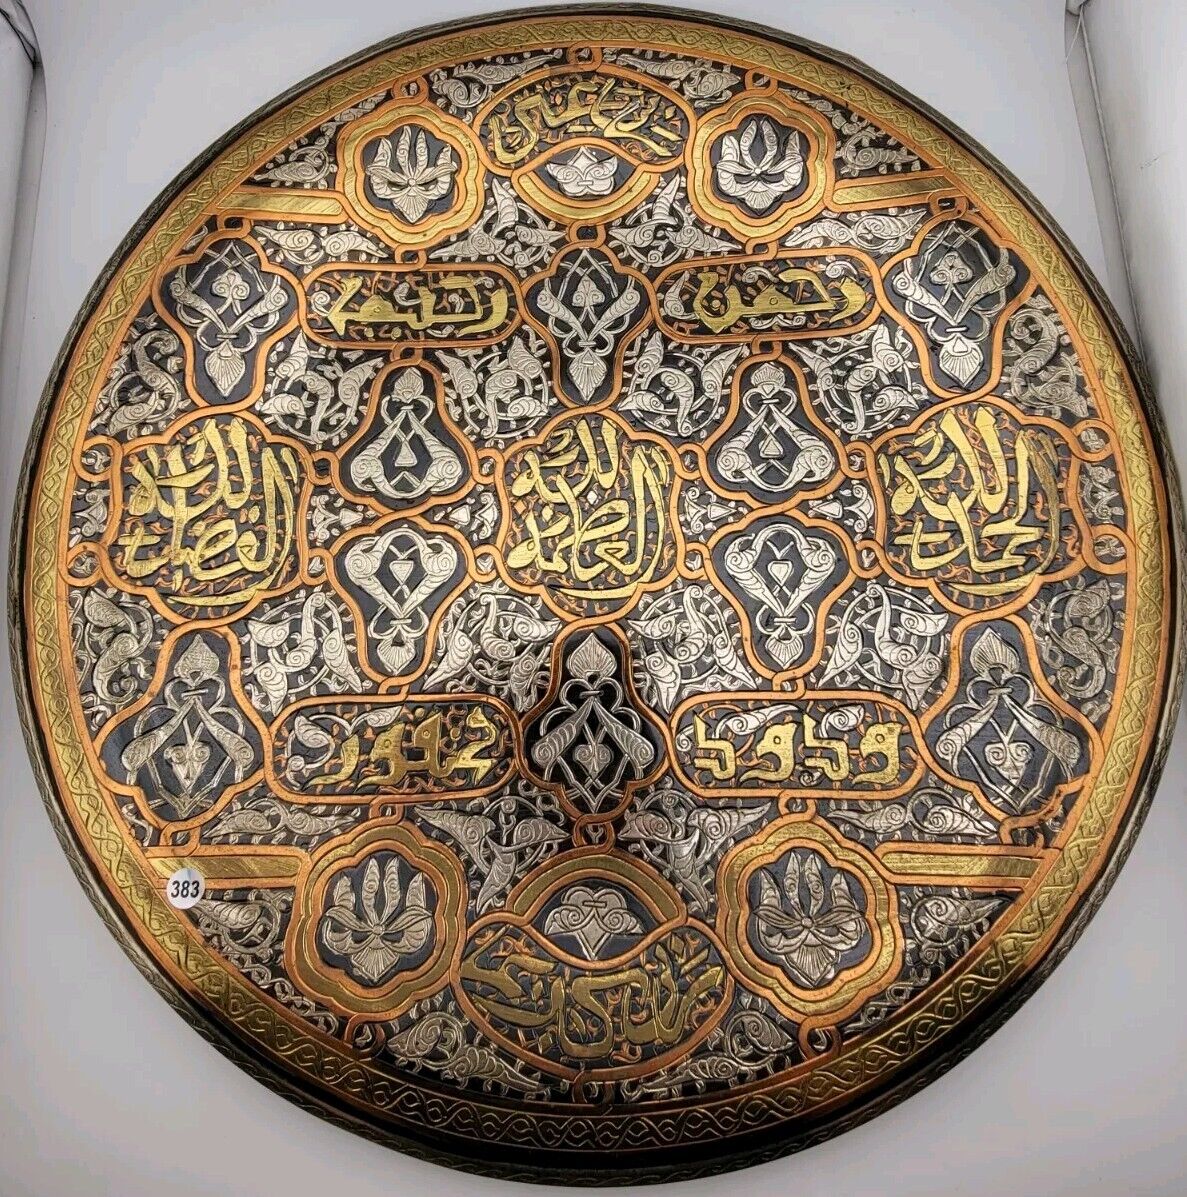 Antique Hand-Etched Engraved Brass 14 inch Wall Round Arabic Islamic Calligraphy